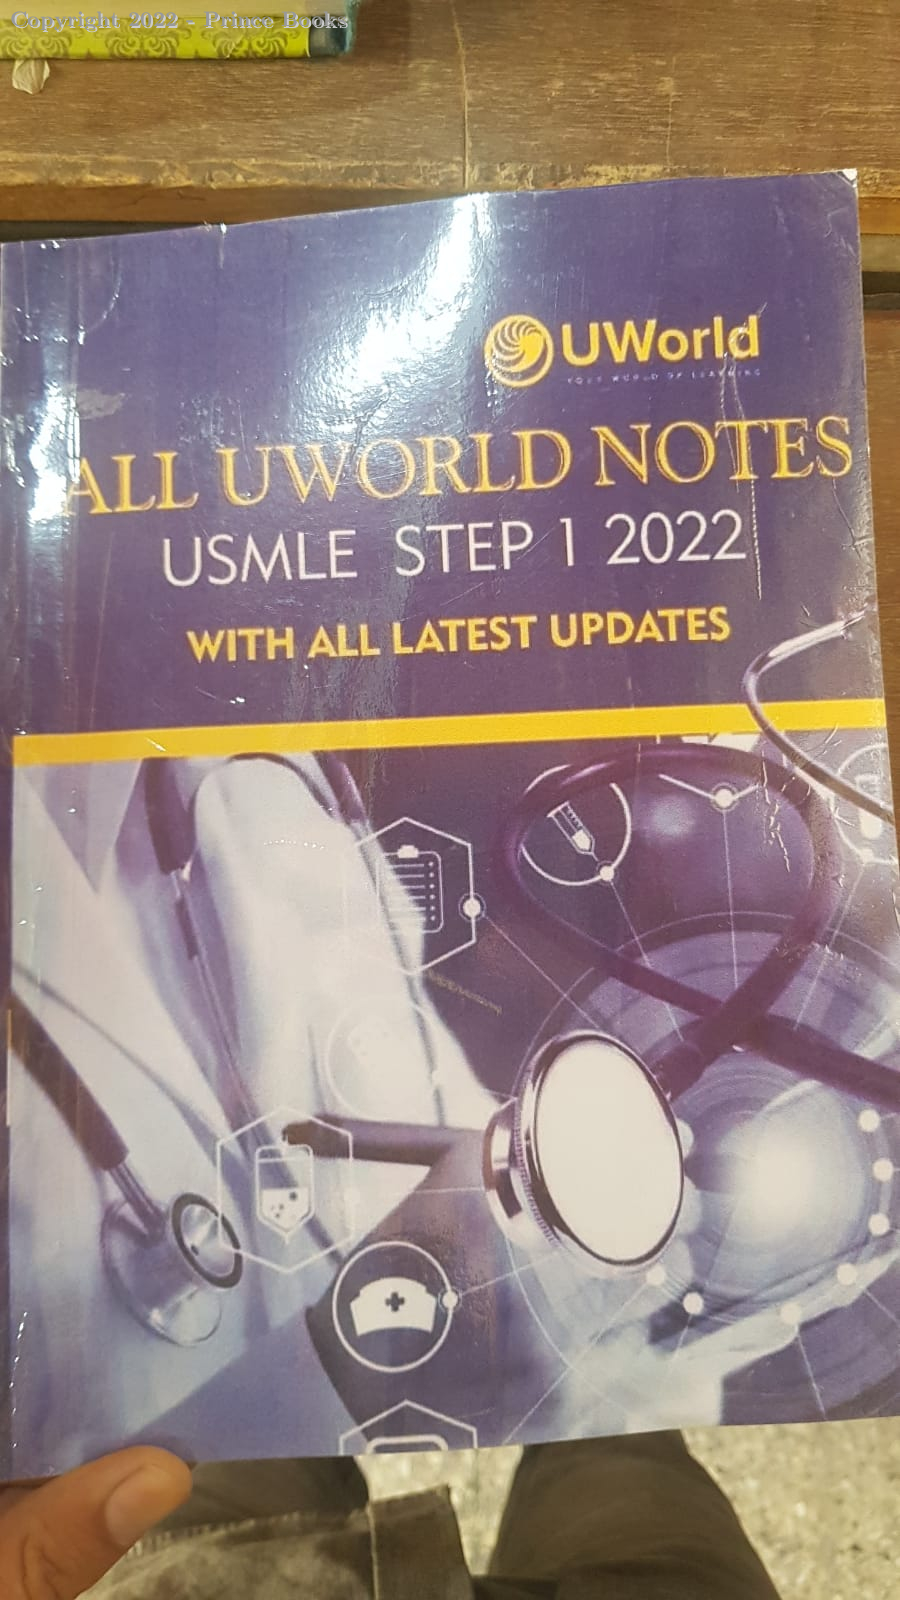 ALL UWORLD NOTES USMLE STEP 1 2022 WITH ALL LATEST UPDATES